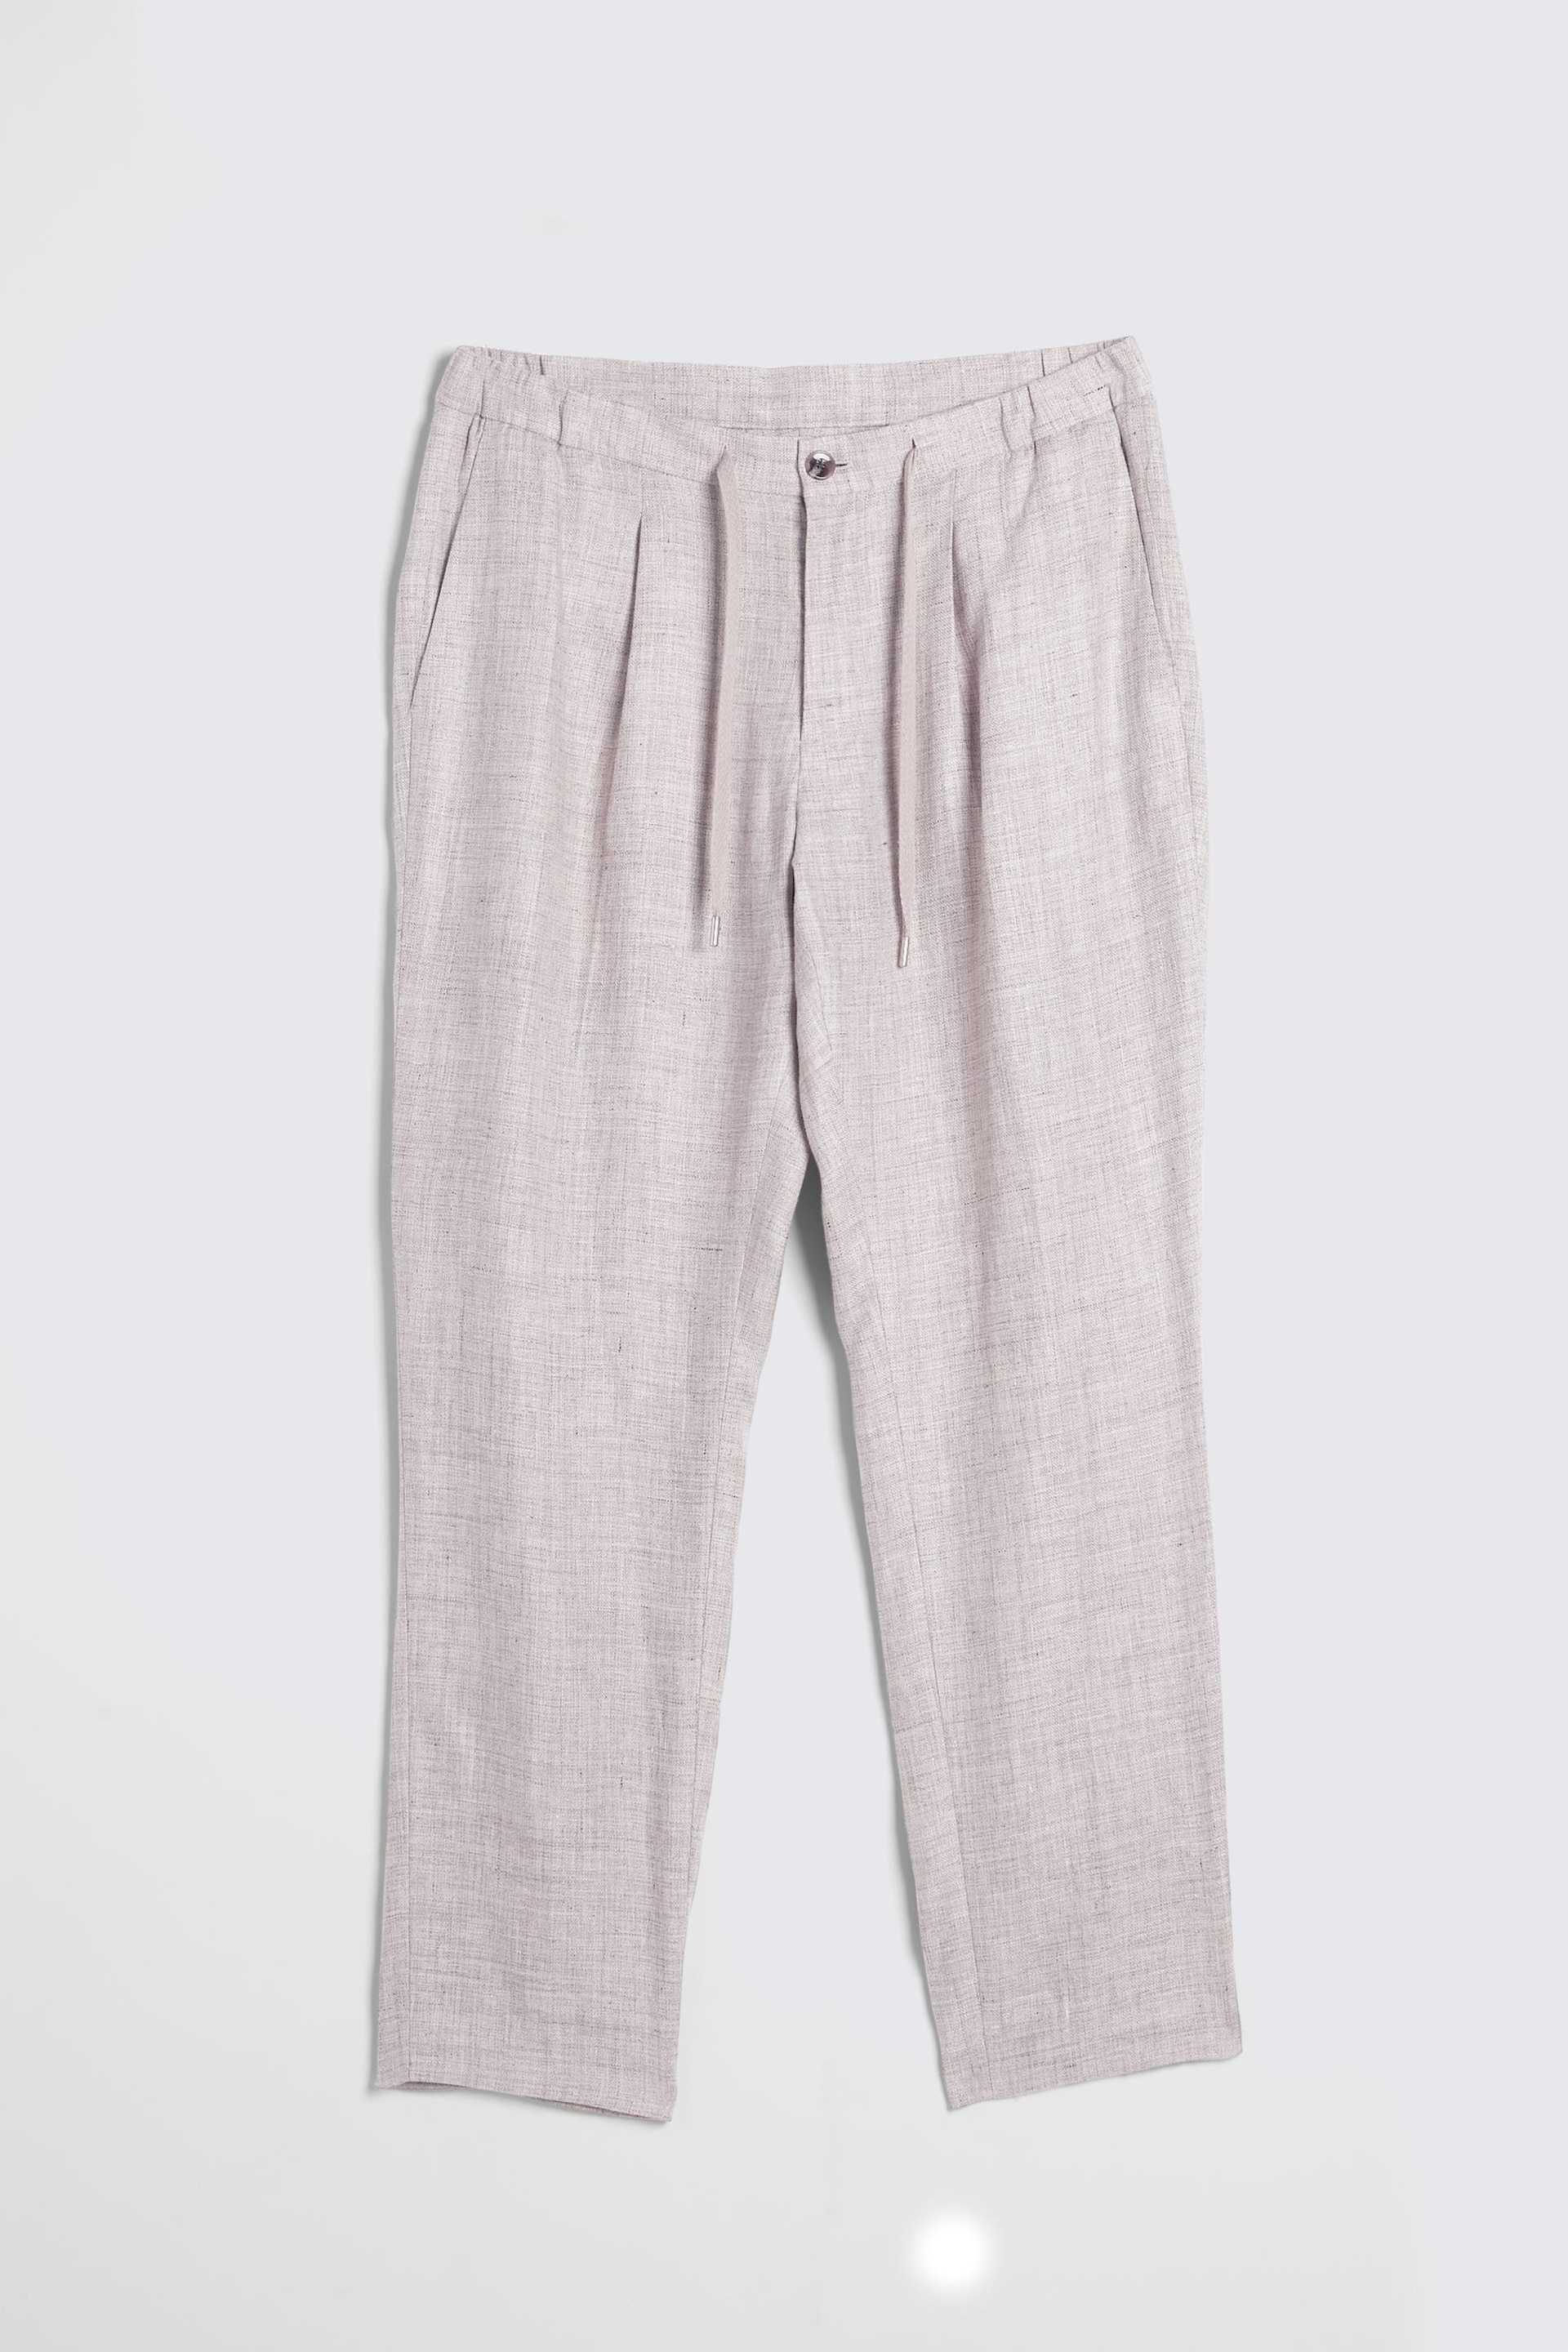 MOSS Grey Linen Worker Joggers - Image 4 of 4